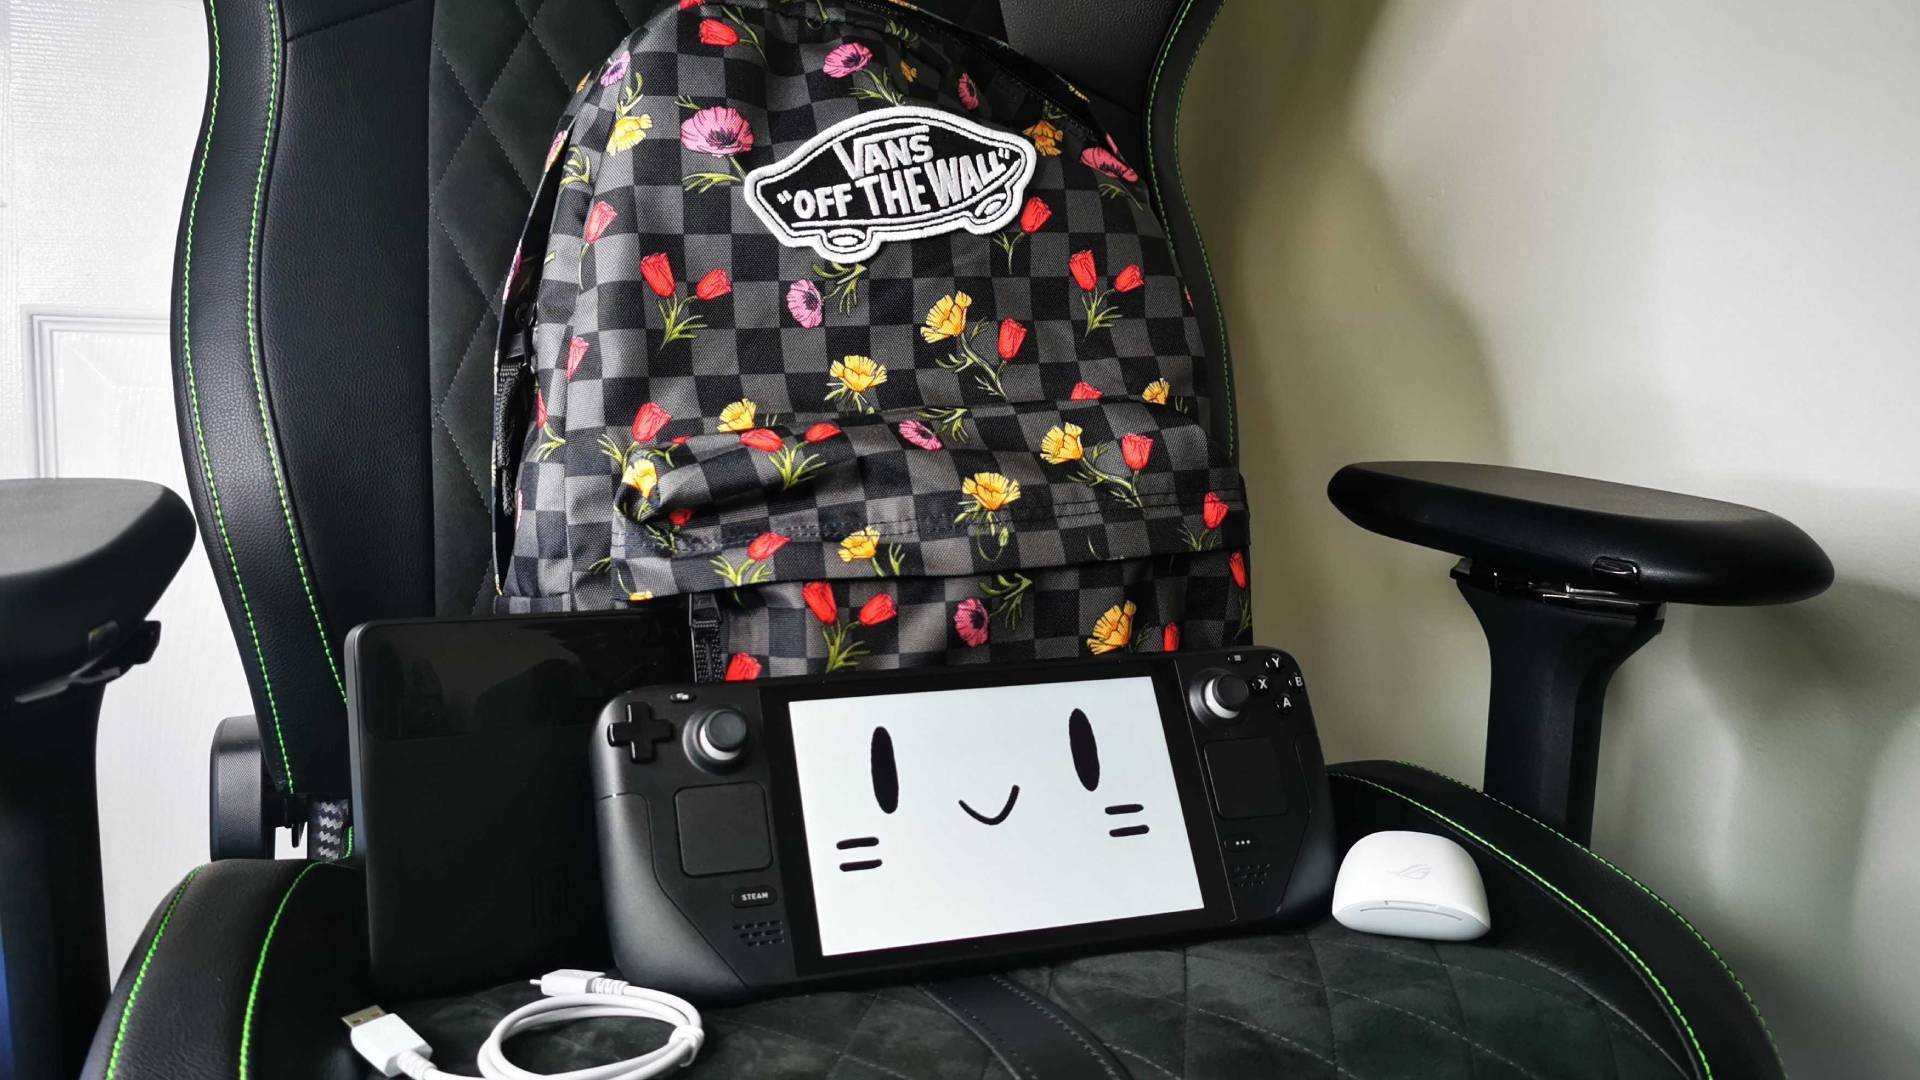 Steam Deck with mascot face on screen sitting on chair with backpack, Asus ROG earbuds, and Baseus power bank